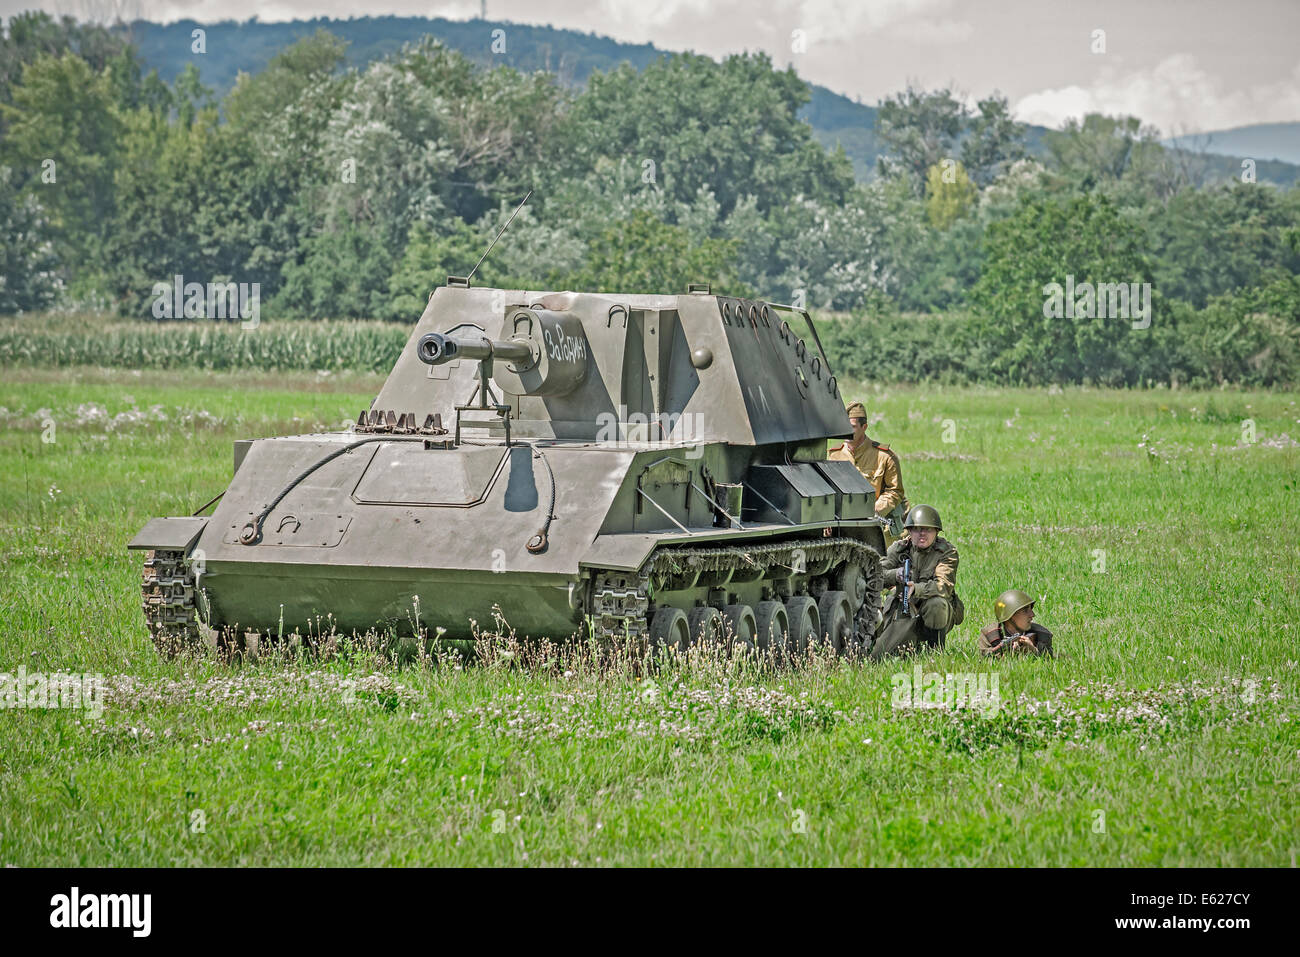 Russian soldiers hiding behind a tank while approaching a battlefield during reenactment of World War II fights in Slovakia Stock Photo